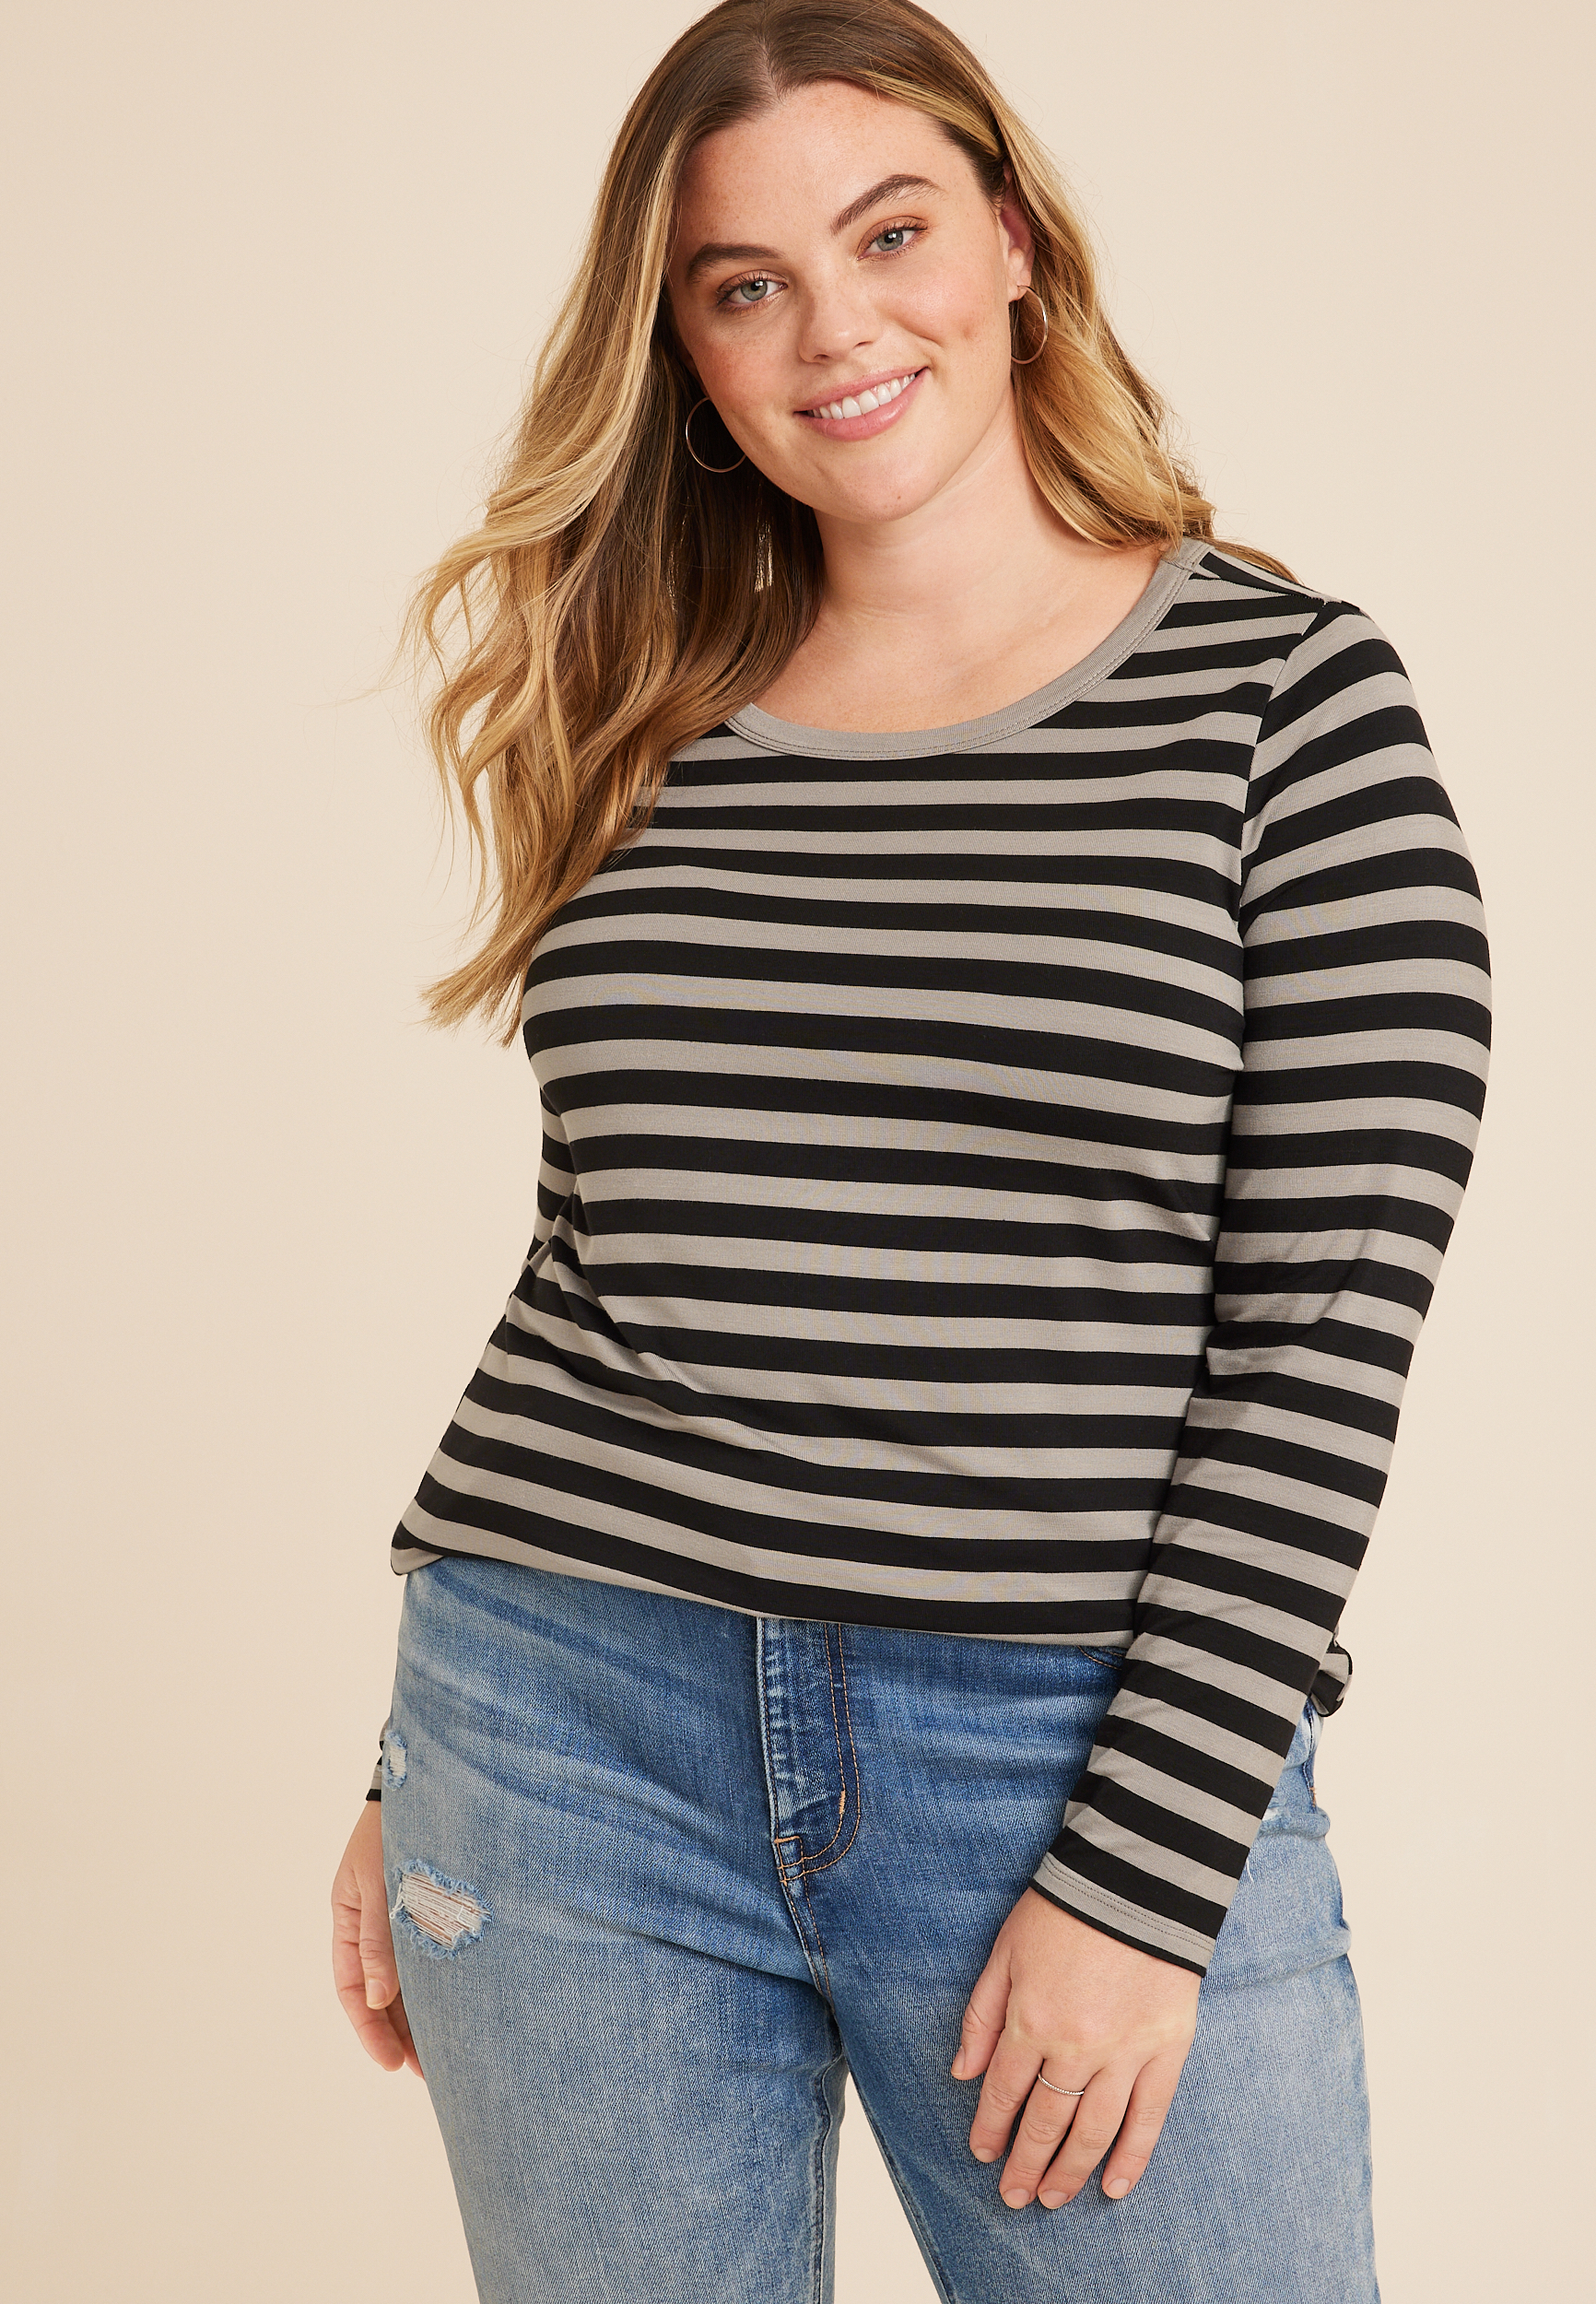 Plus Size 24/7 Kennedy Striped Crew Neck Tee | maurices